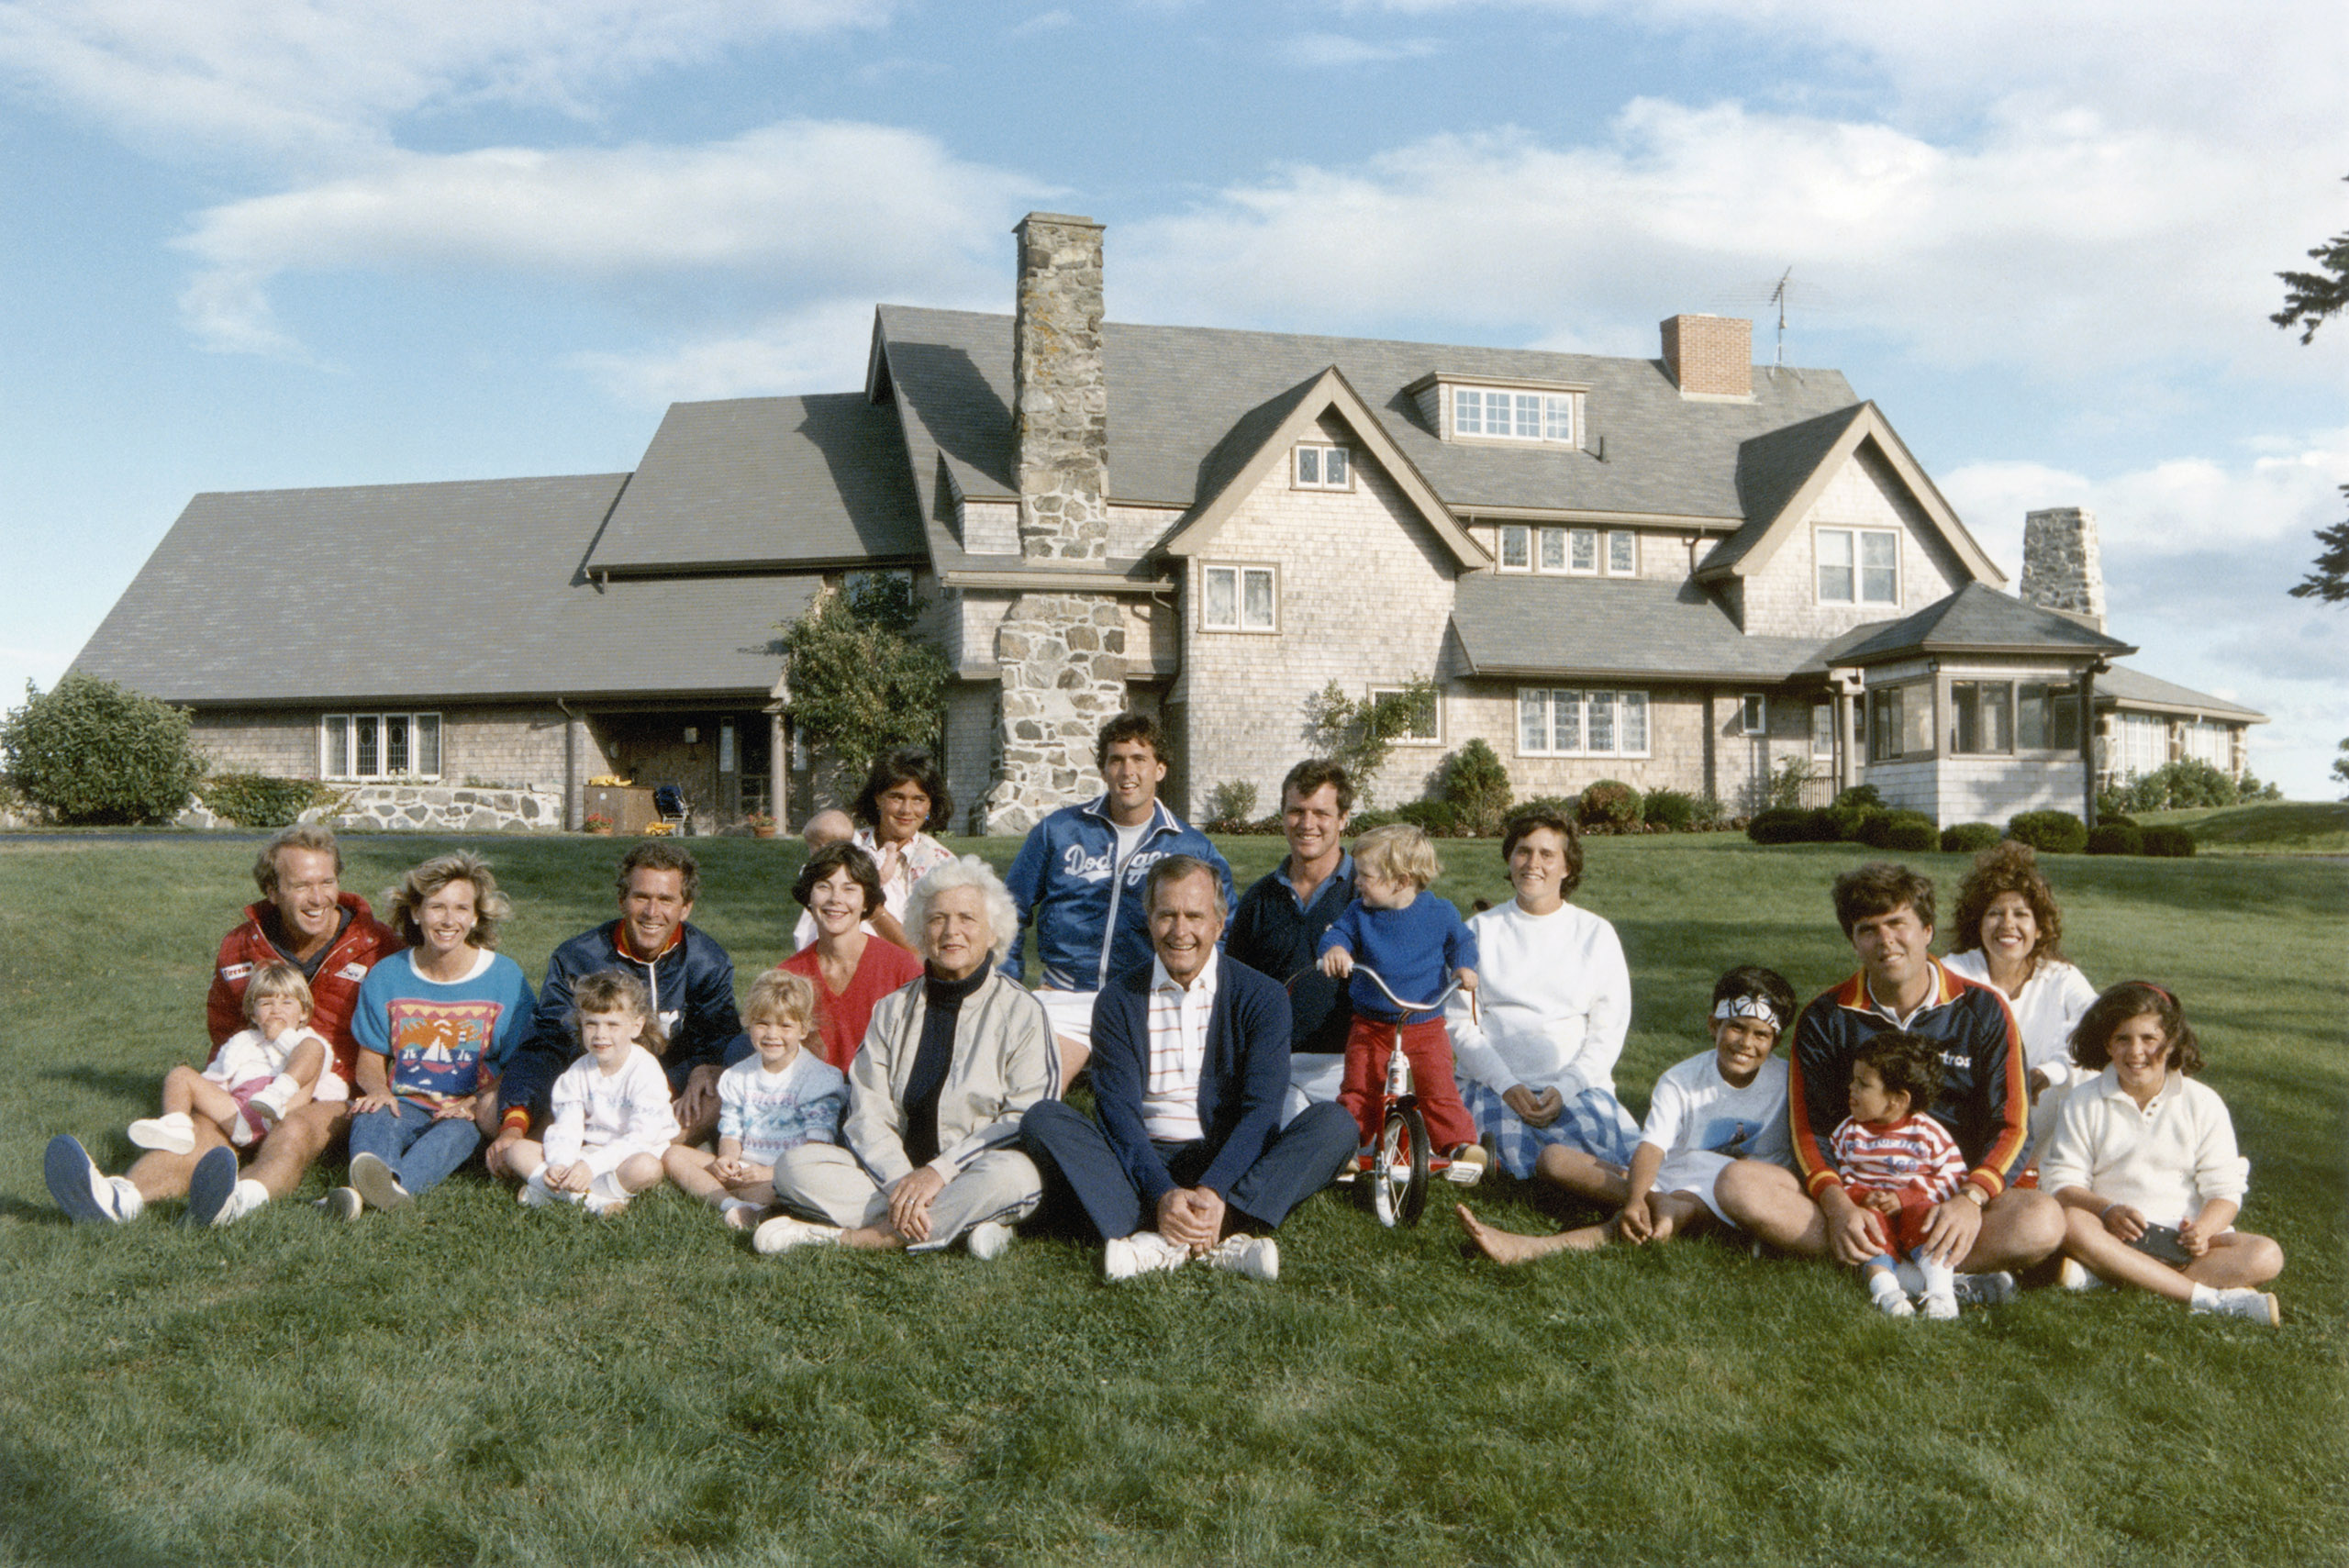 George H.W. Bush: The first President Bush and his wife Barbara have five living children, all of whom appear in this 1986 group shot taken in front of the family's Kennebunkport, Maine, home. Neil, a businessman, is at far left in the red jacket; George W., the 43rd President, is seated third from left; Marvin, an investment banker, is in the back row in the Dodgers jacket; Dorothy, known as  Doro,  is seated next to the child on the bicycle; and Jeb, the former governor of Florida, is toward the right with his children in a blue and red jacket.